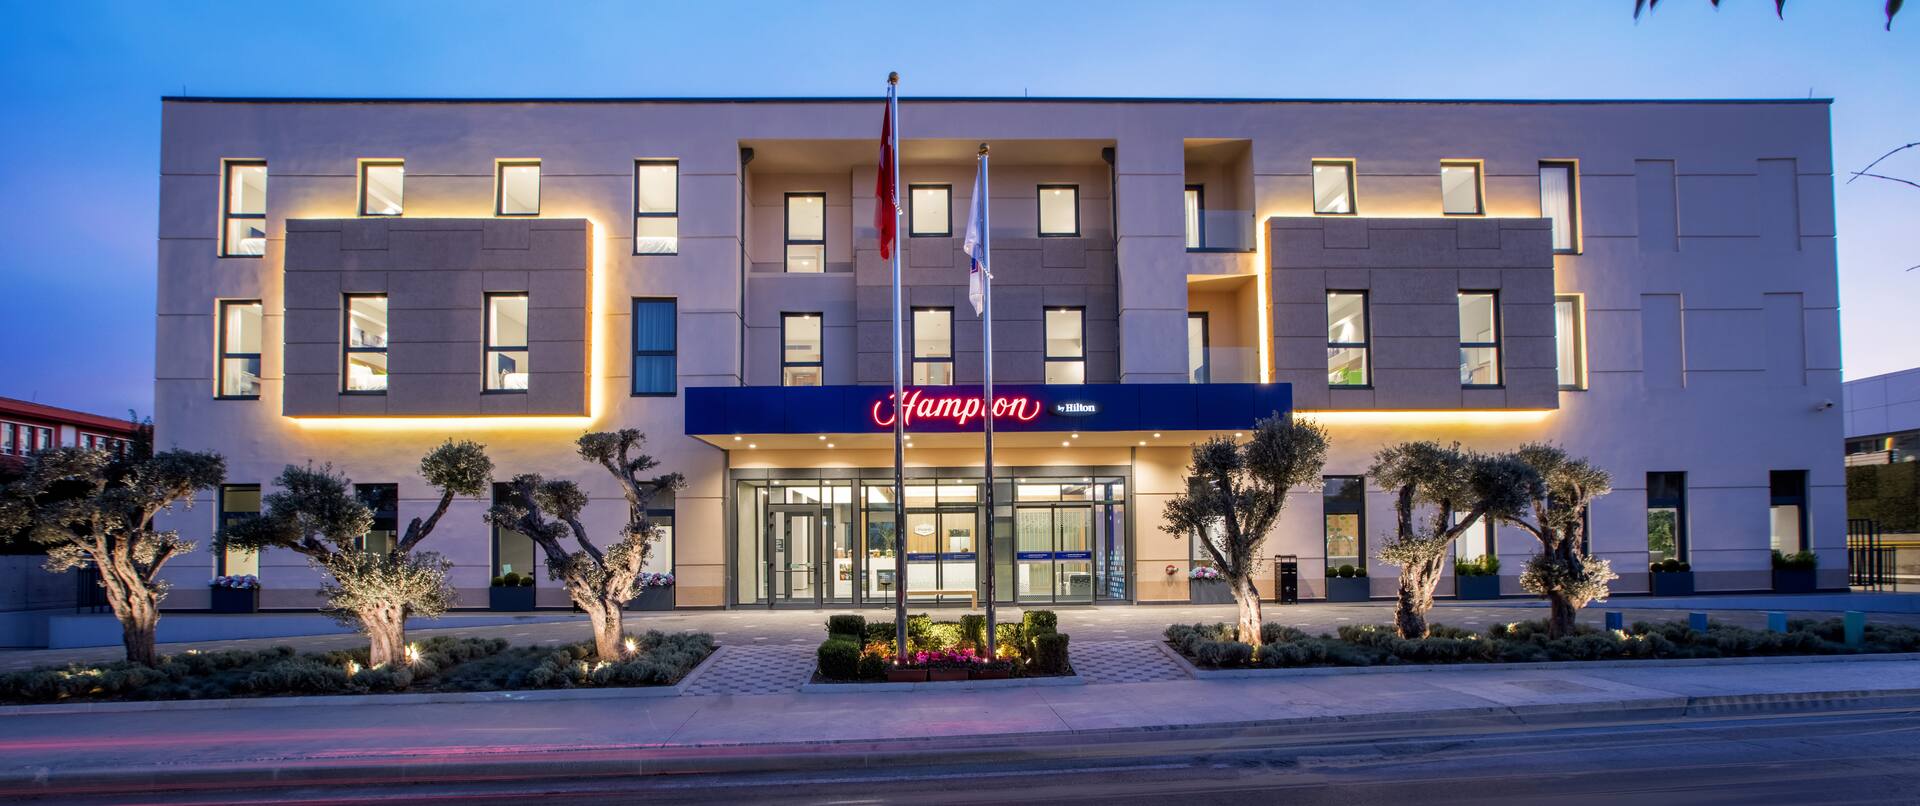 Hotel Exterior With Front Entrance